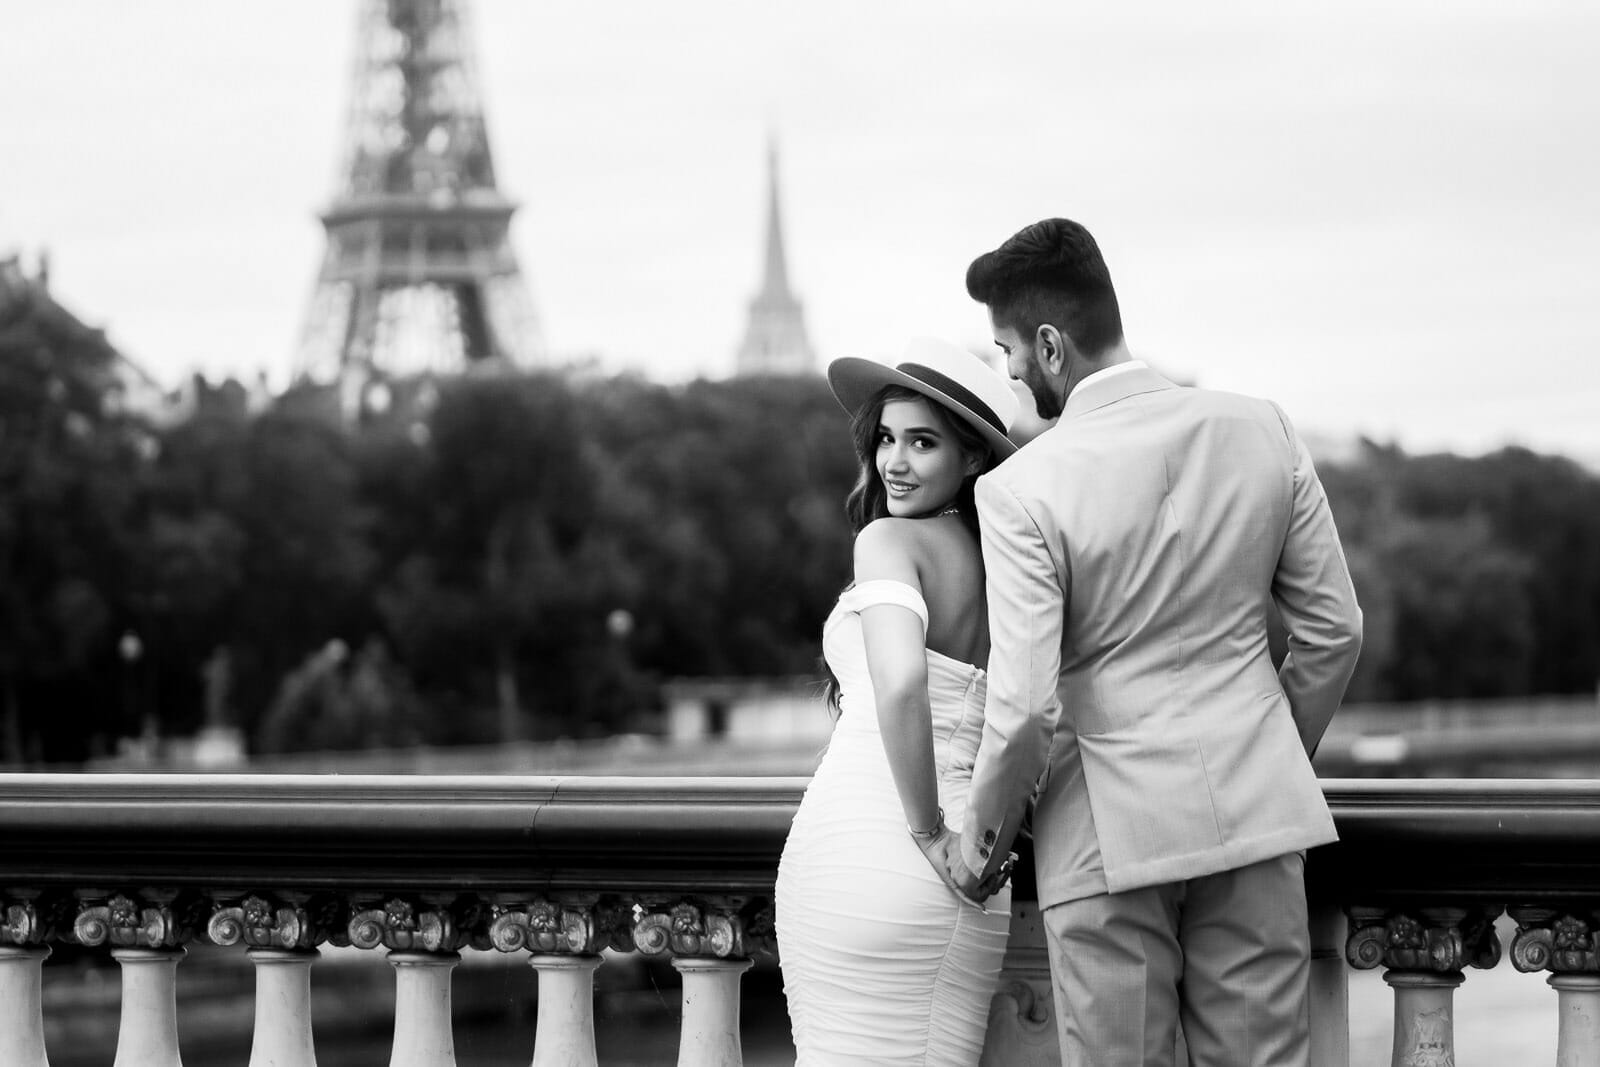 Stylish engagement photos in Paris at Alexander III with Eiffel Tower view